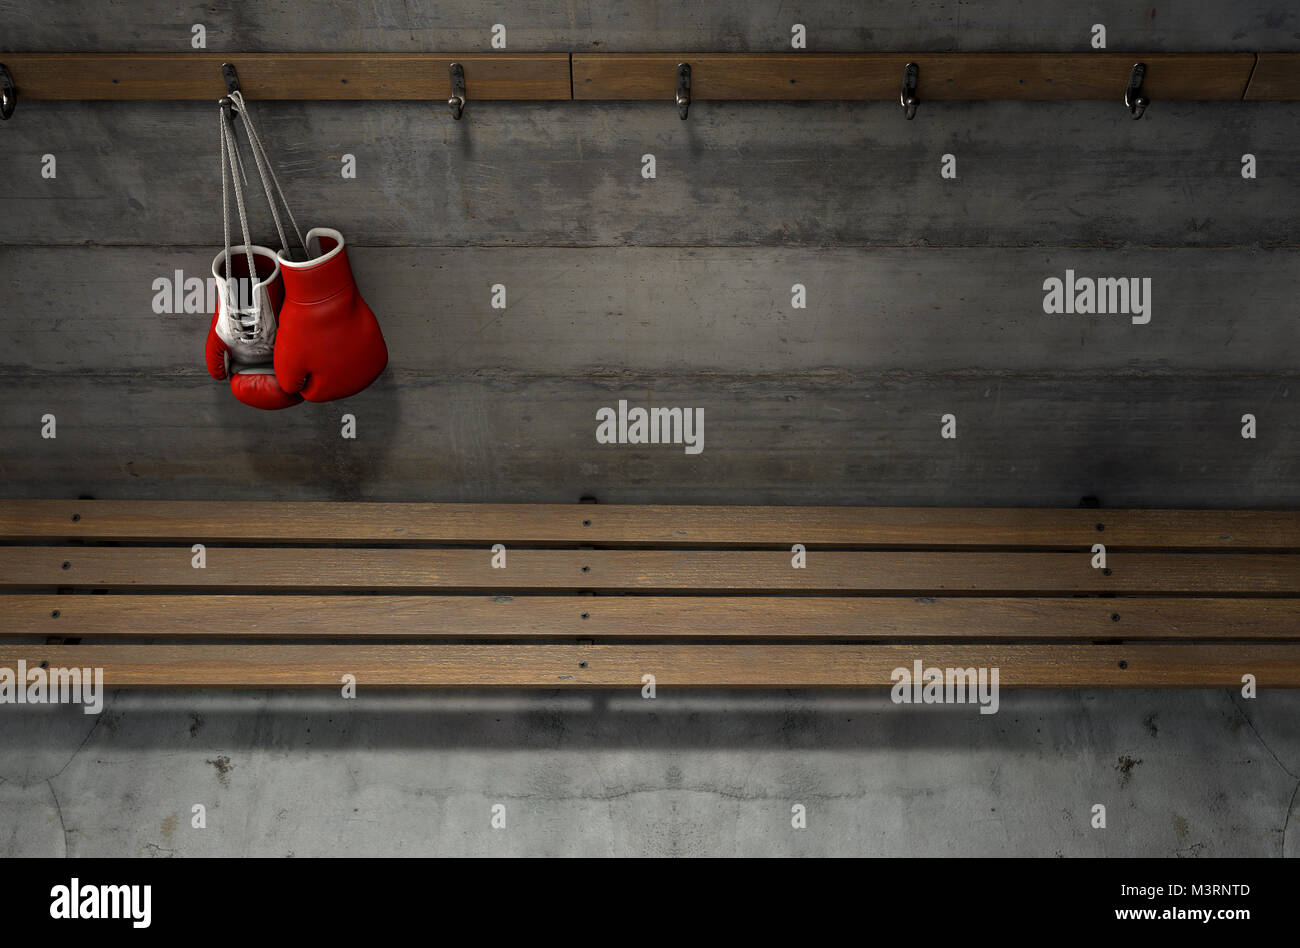 Spotlit boxing gloves hanging on a hanger above an empty wooden bench in a locker change room - 3D render Stock Photo